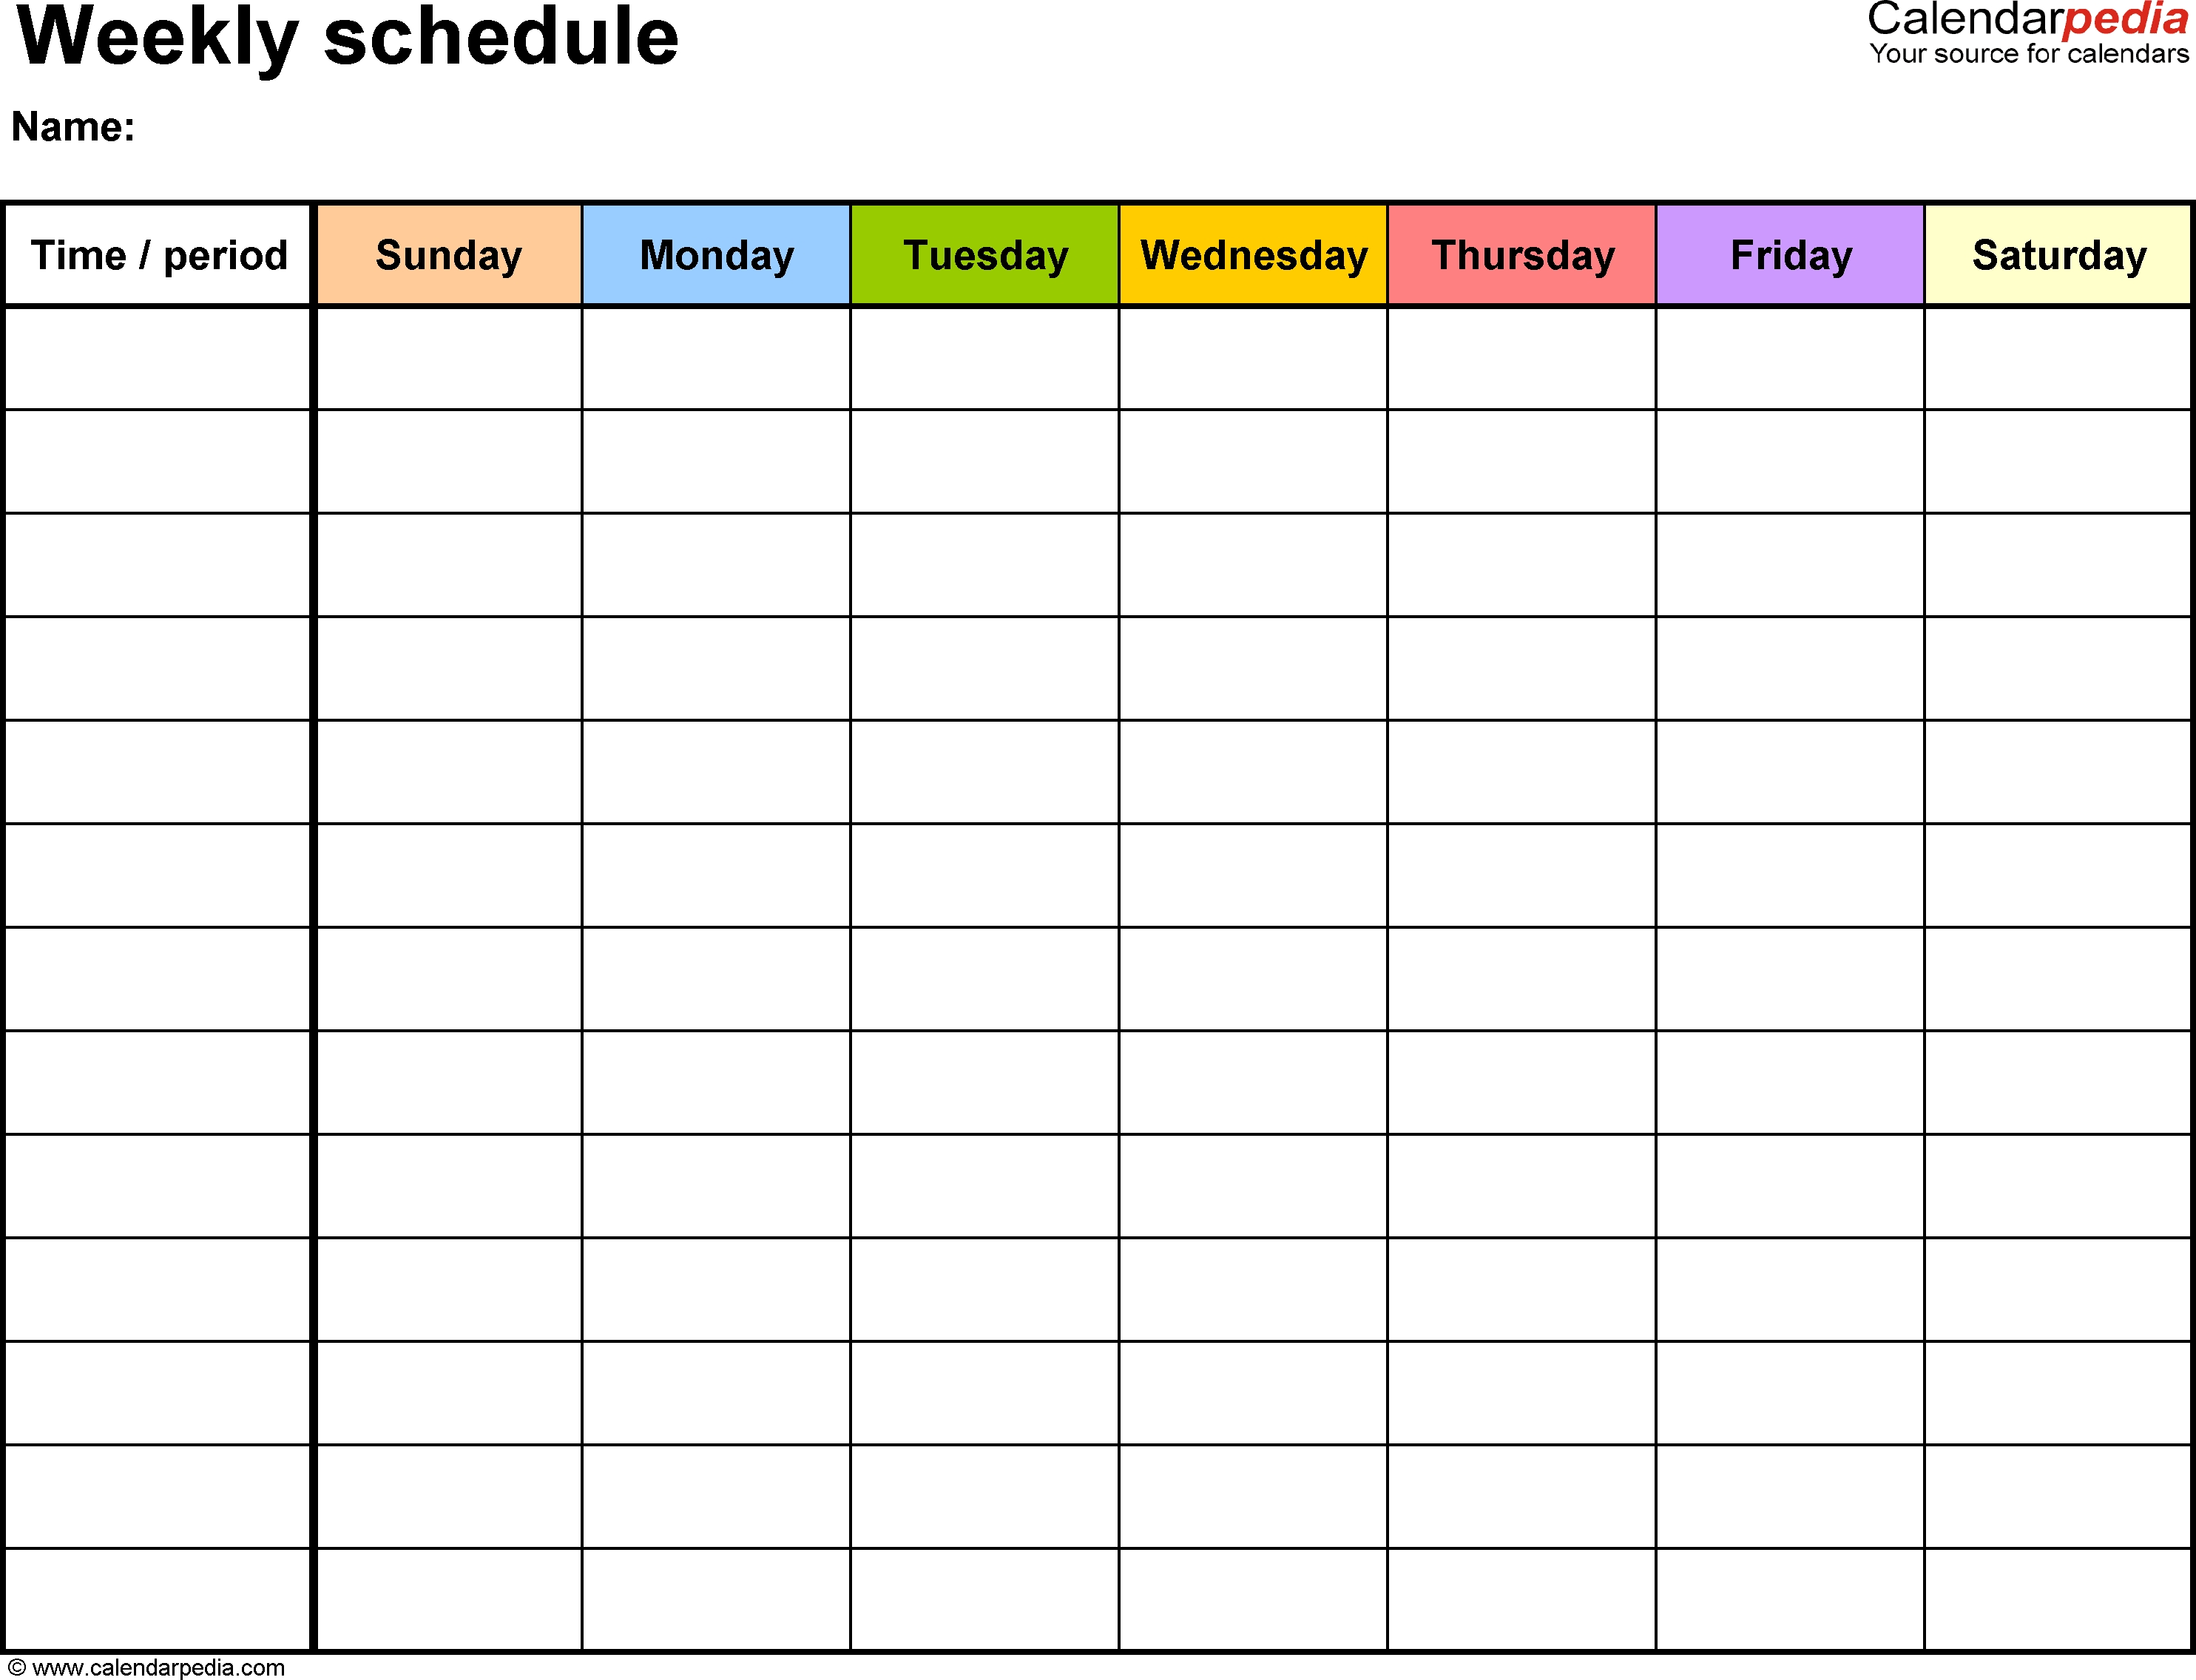 Free Weekly Schedule Templates For Excel - 18 Templates for To Do Calendar Template Free